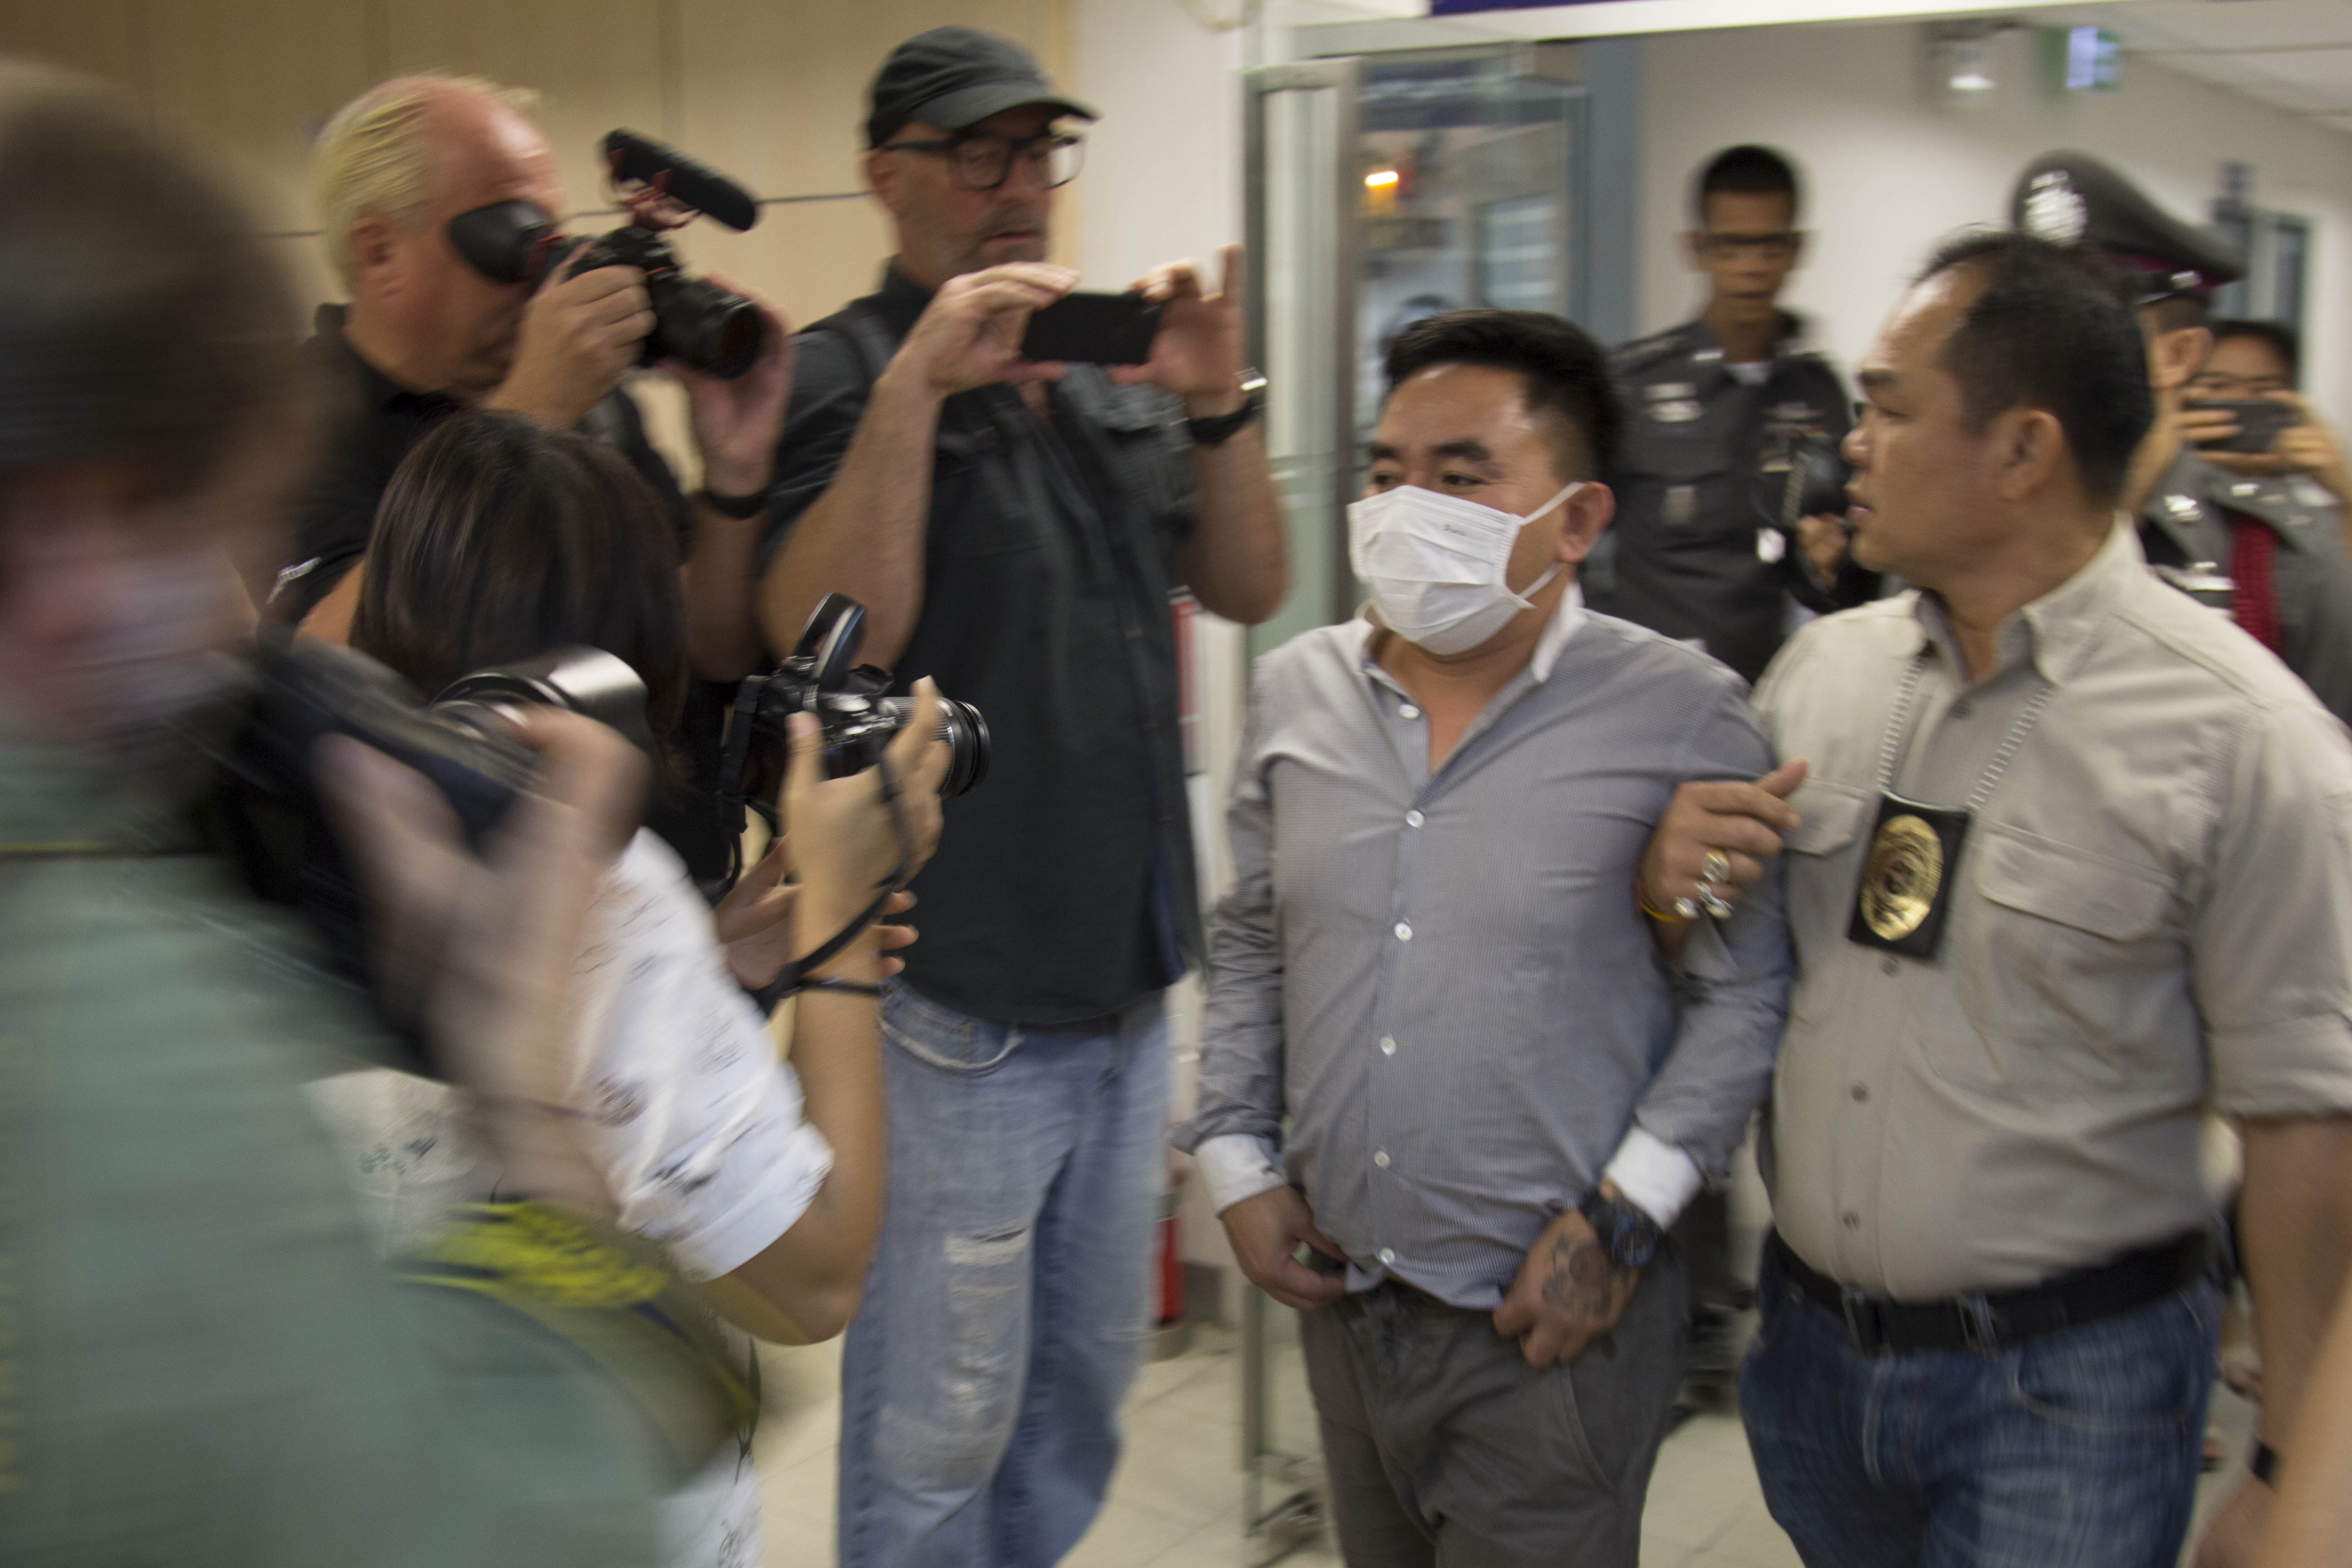 Wildlife trafficking kingpin Insert name sits in handcuffs after being arrested on conspiracy to traffic charges in Bangkok.
Photo: Freeland/Matthew P